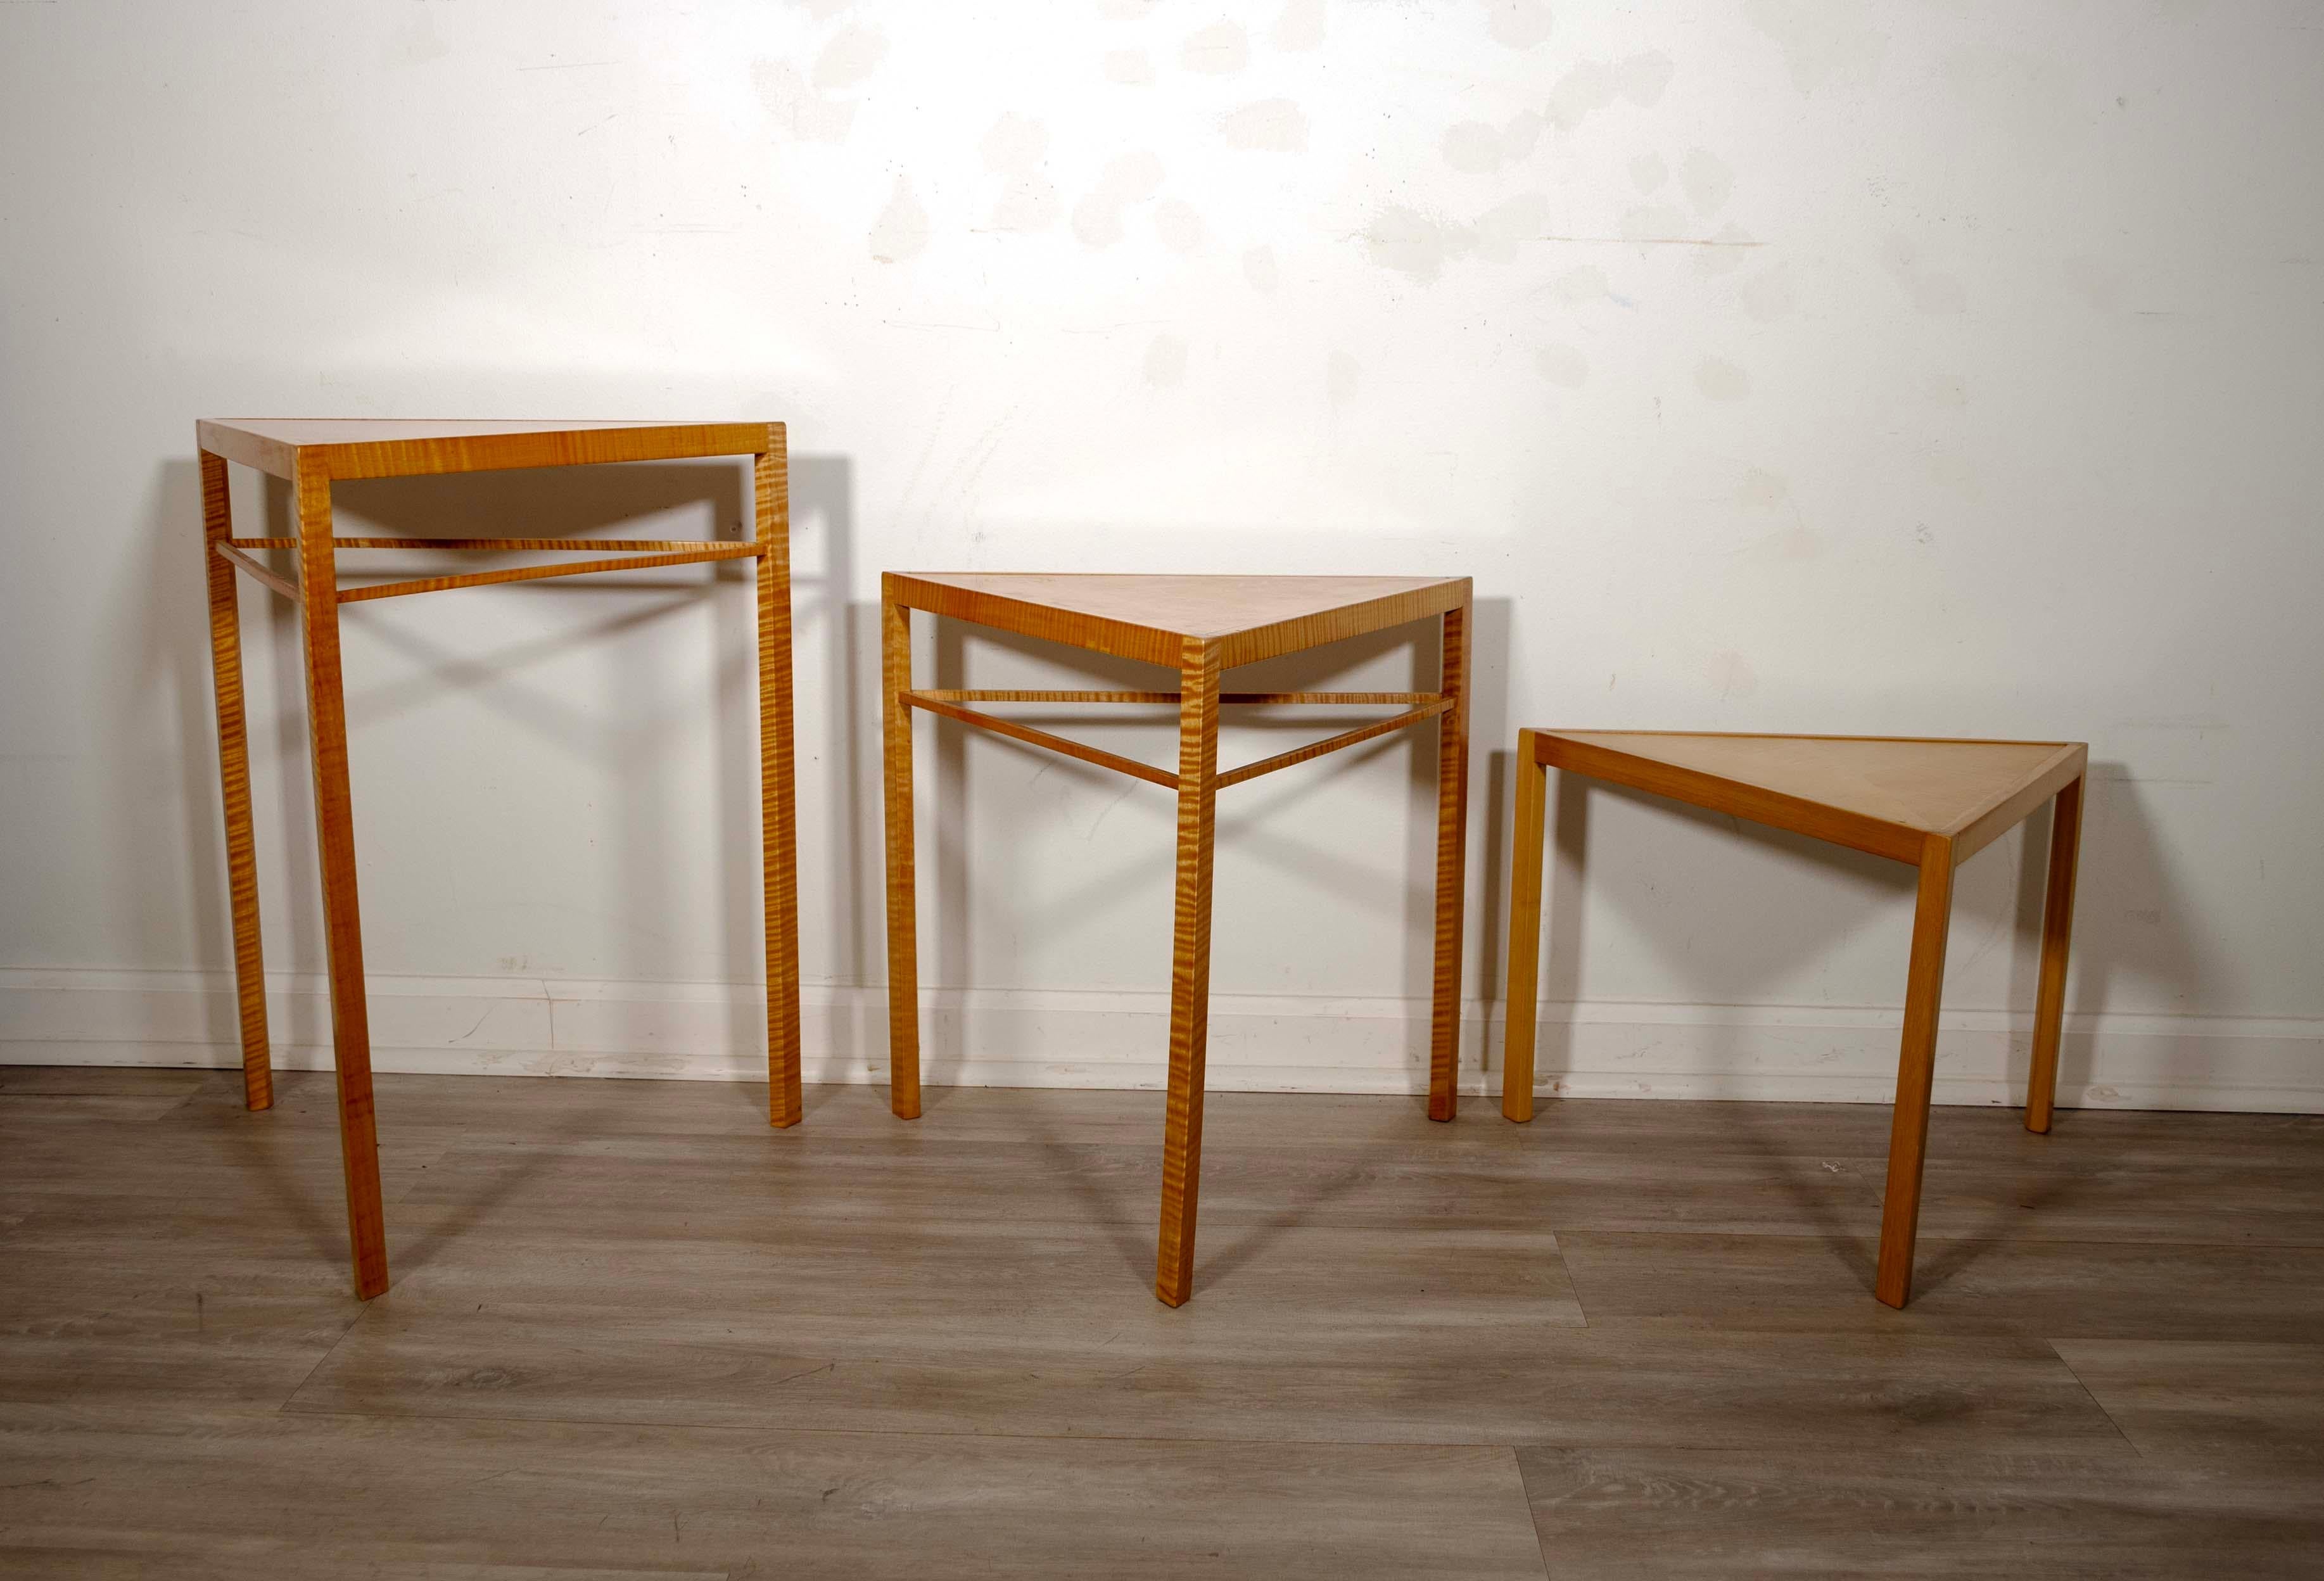 American Ralph Rye Kite Tables Signed Set of 3 Postmodern Nesting Tables Curly Maple Wood For Sale